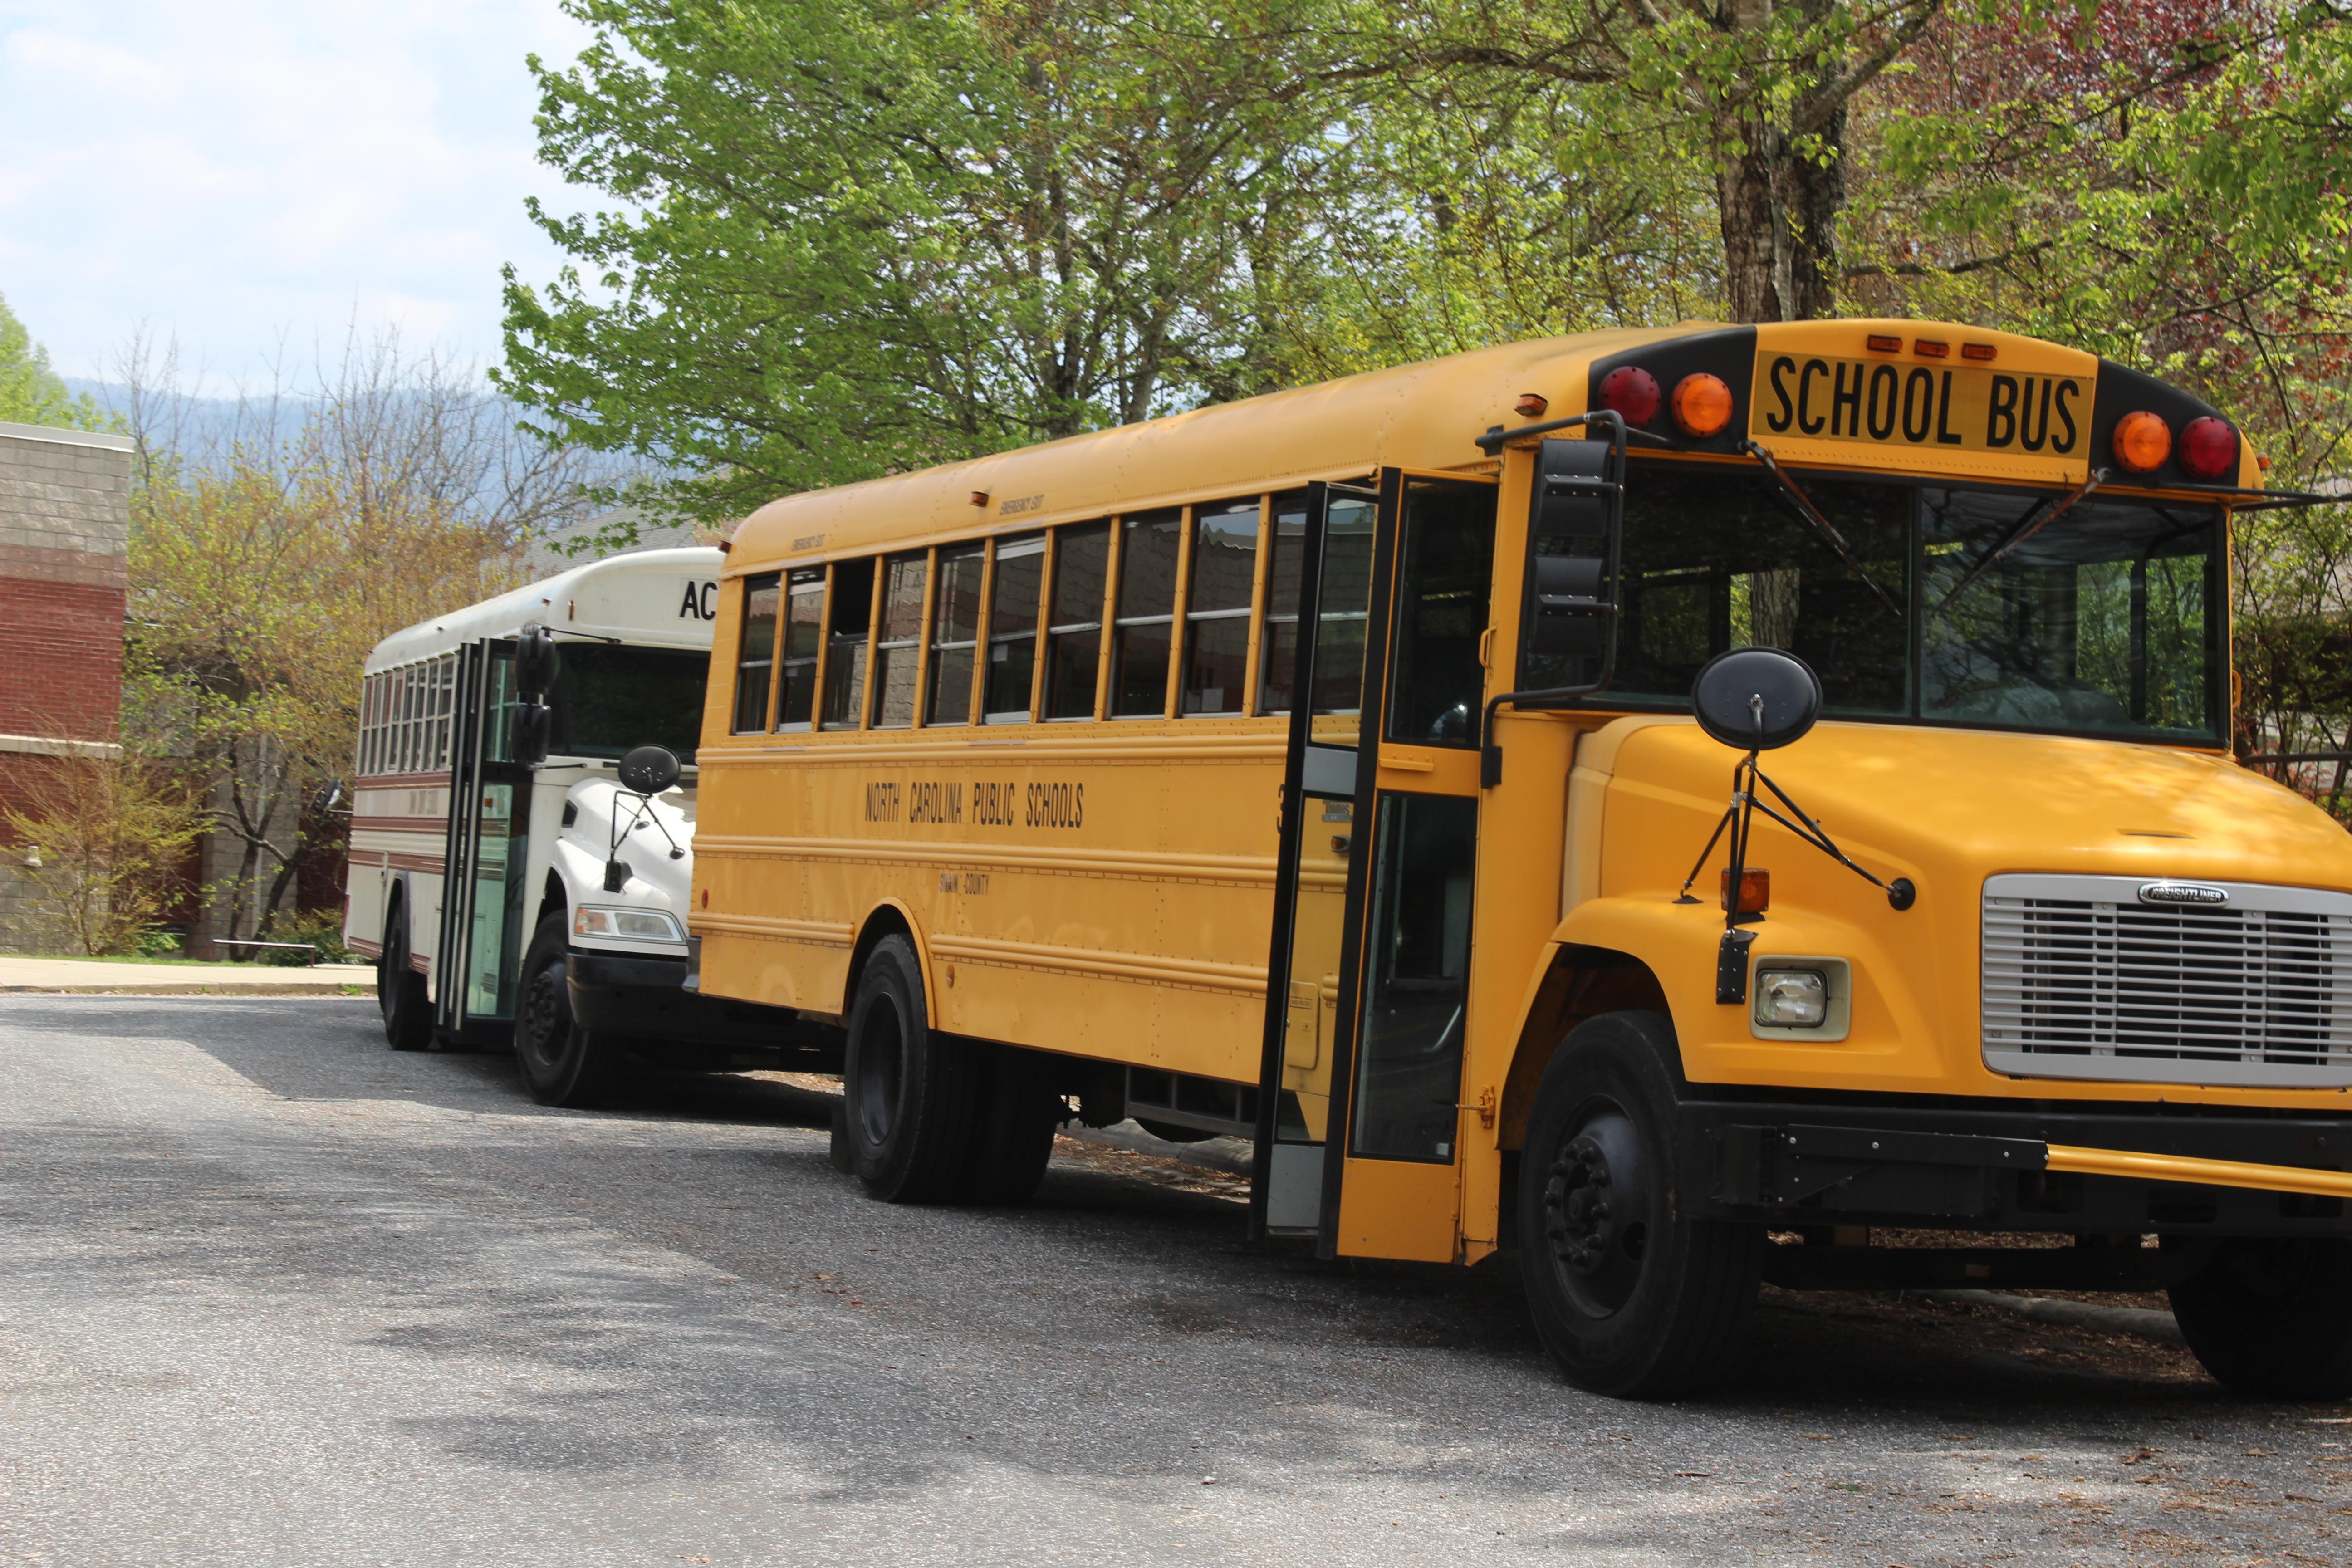 School buses are parked at Swain Middle School ready to transport students home on Tuesday. The school board just approved funding to upgrade the bus cameras.